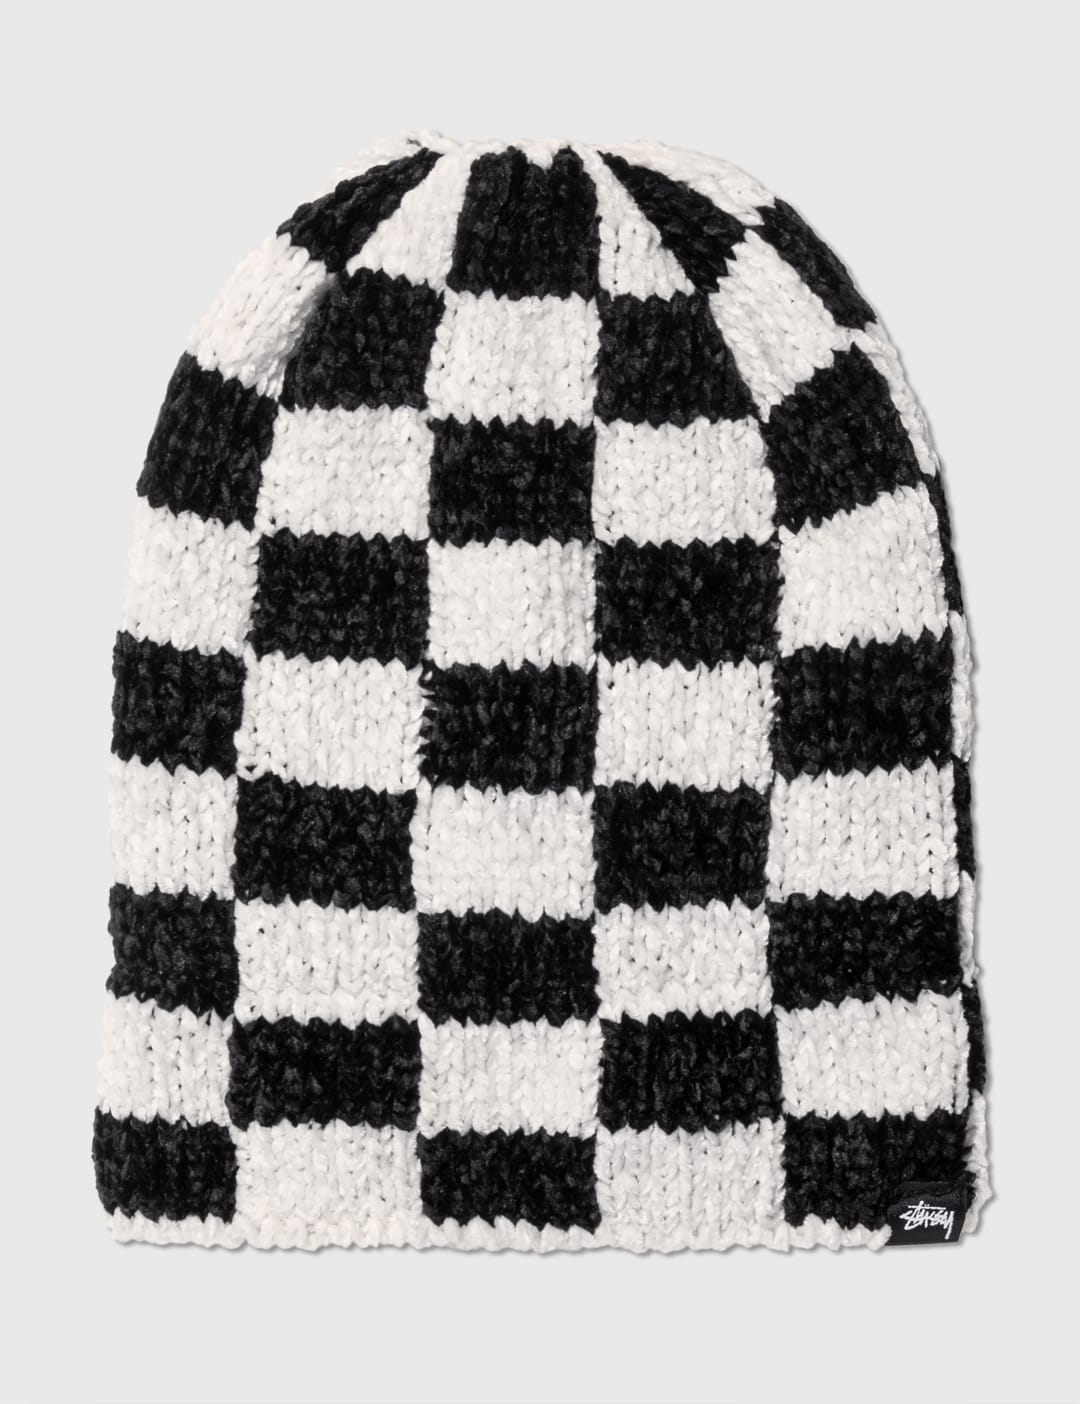 Stüssy - Crochet Checkered Beanie | HBX - Globally Curated Fashion and  Lifestyle by Hypebeast